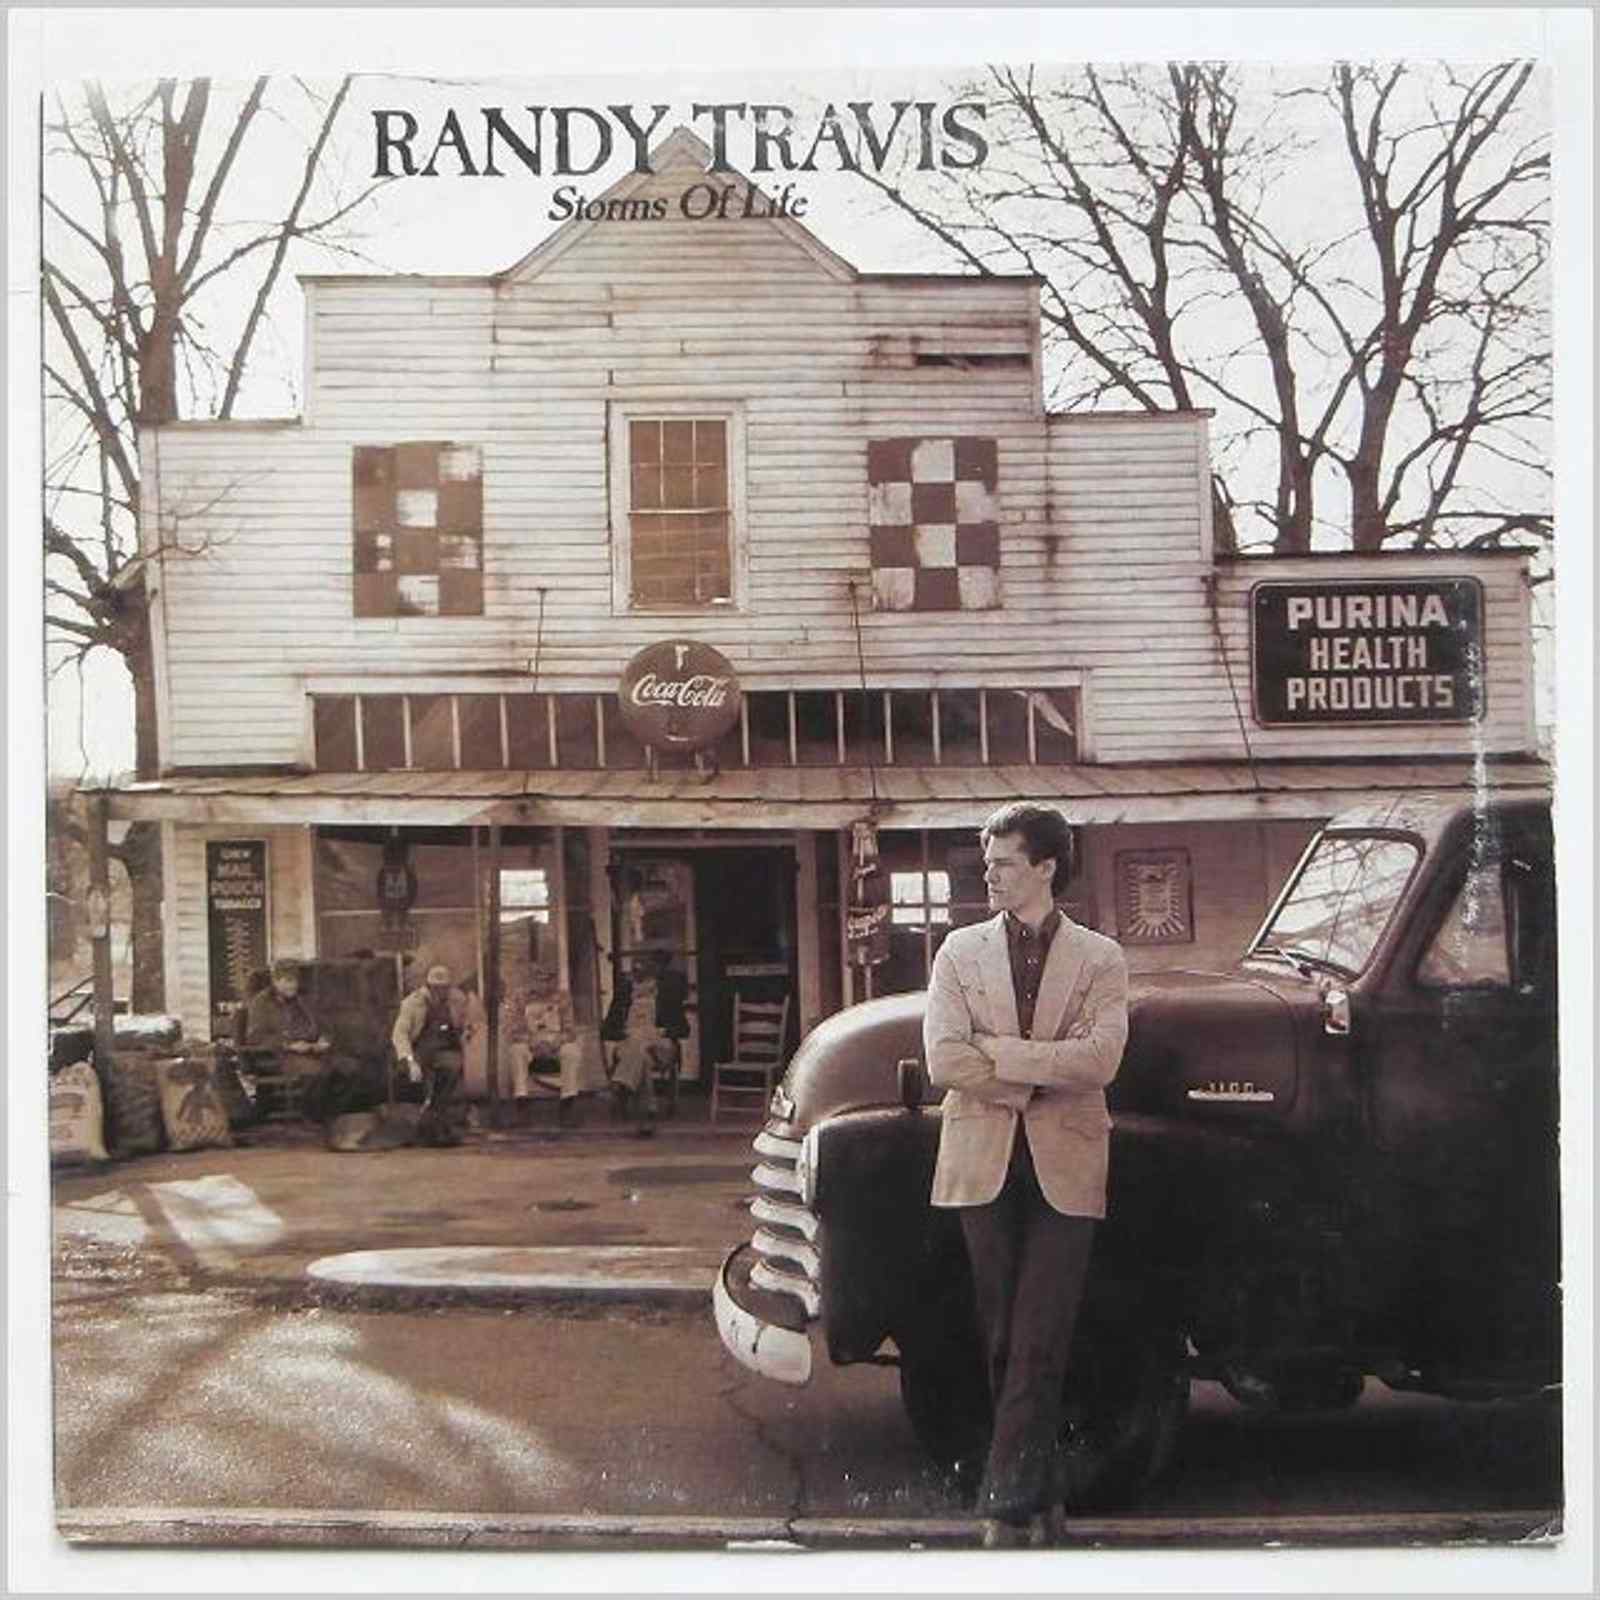 Storms of Life (35th Anniversary Deluxe Edition) by Randy Travis